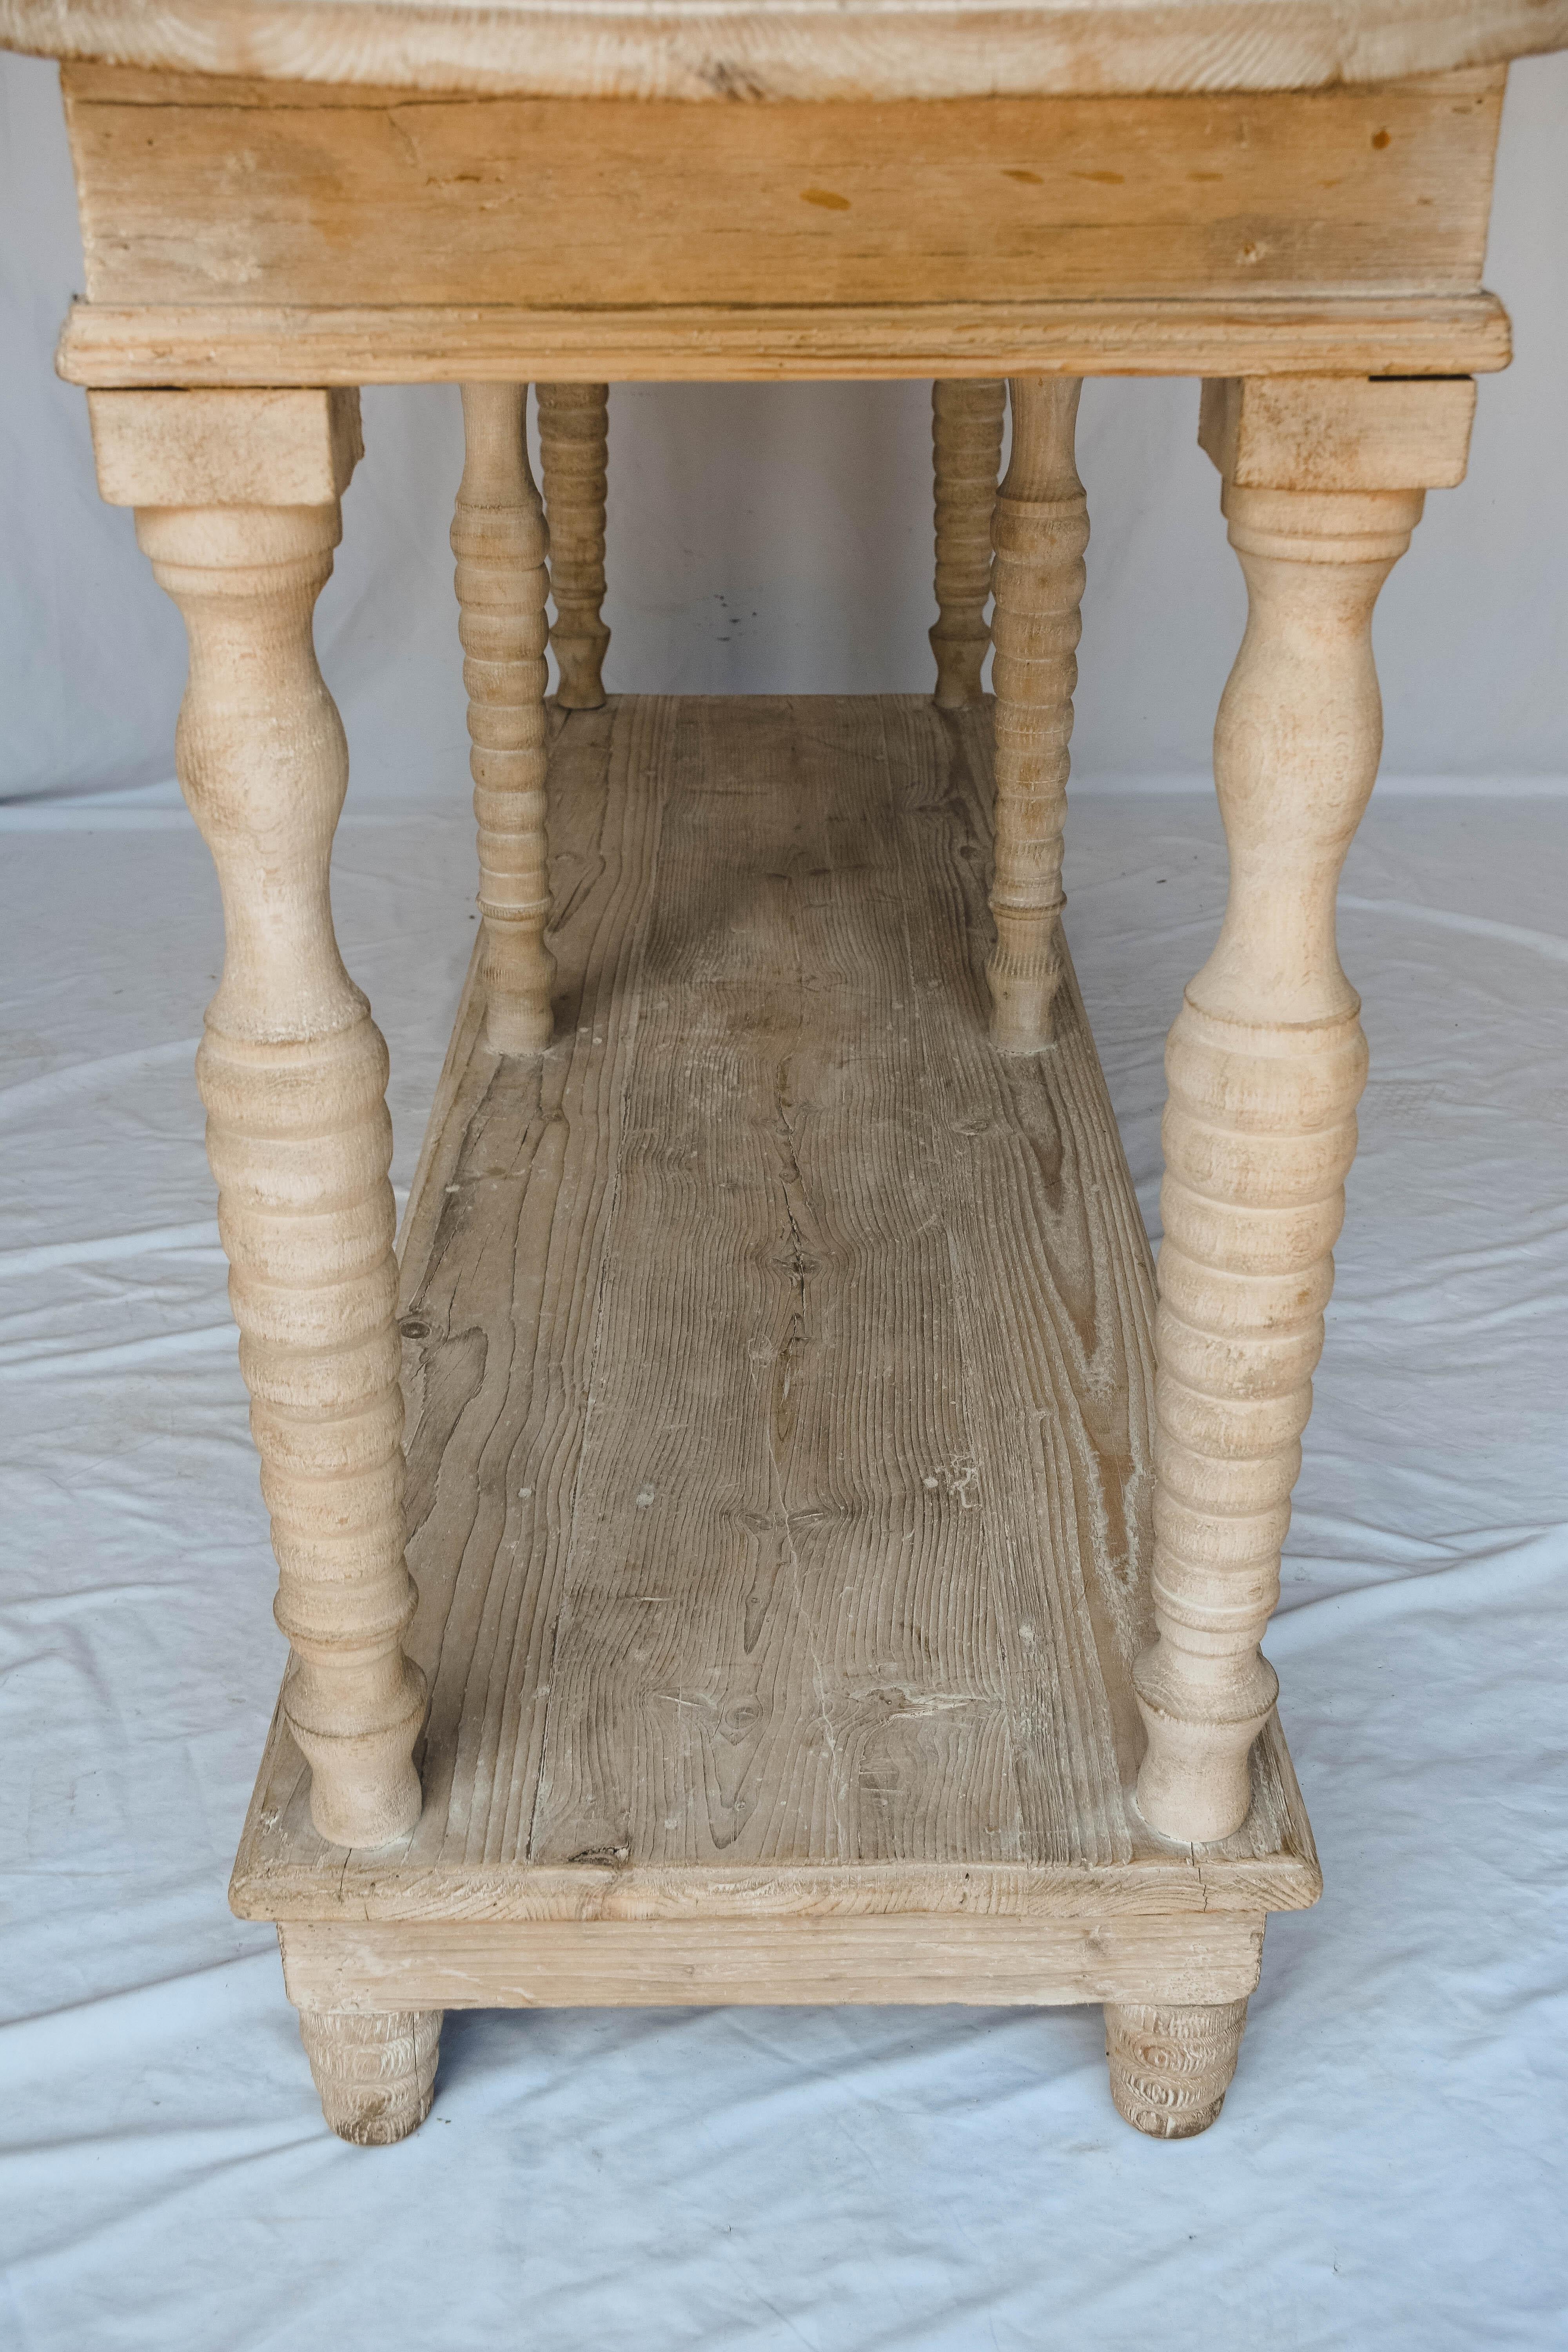 This 19th century console table in abete (fir) wood is a beautiful light white washed color. The legs on this table are turned and it has a second level perfect for storage. This would make a handsome addition to any family room paired with a couch